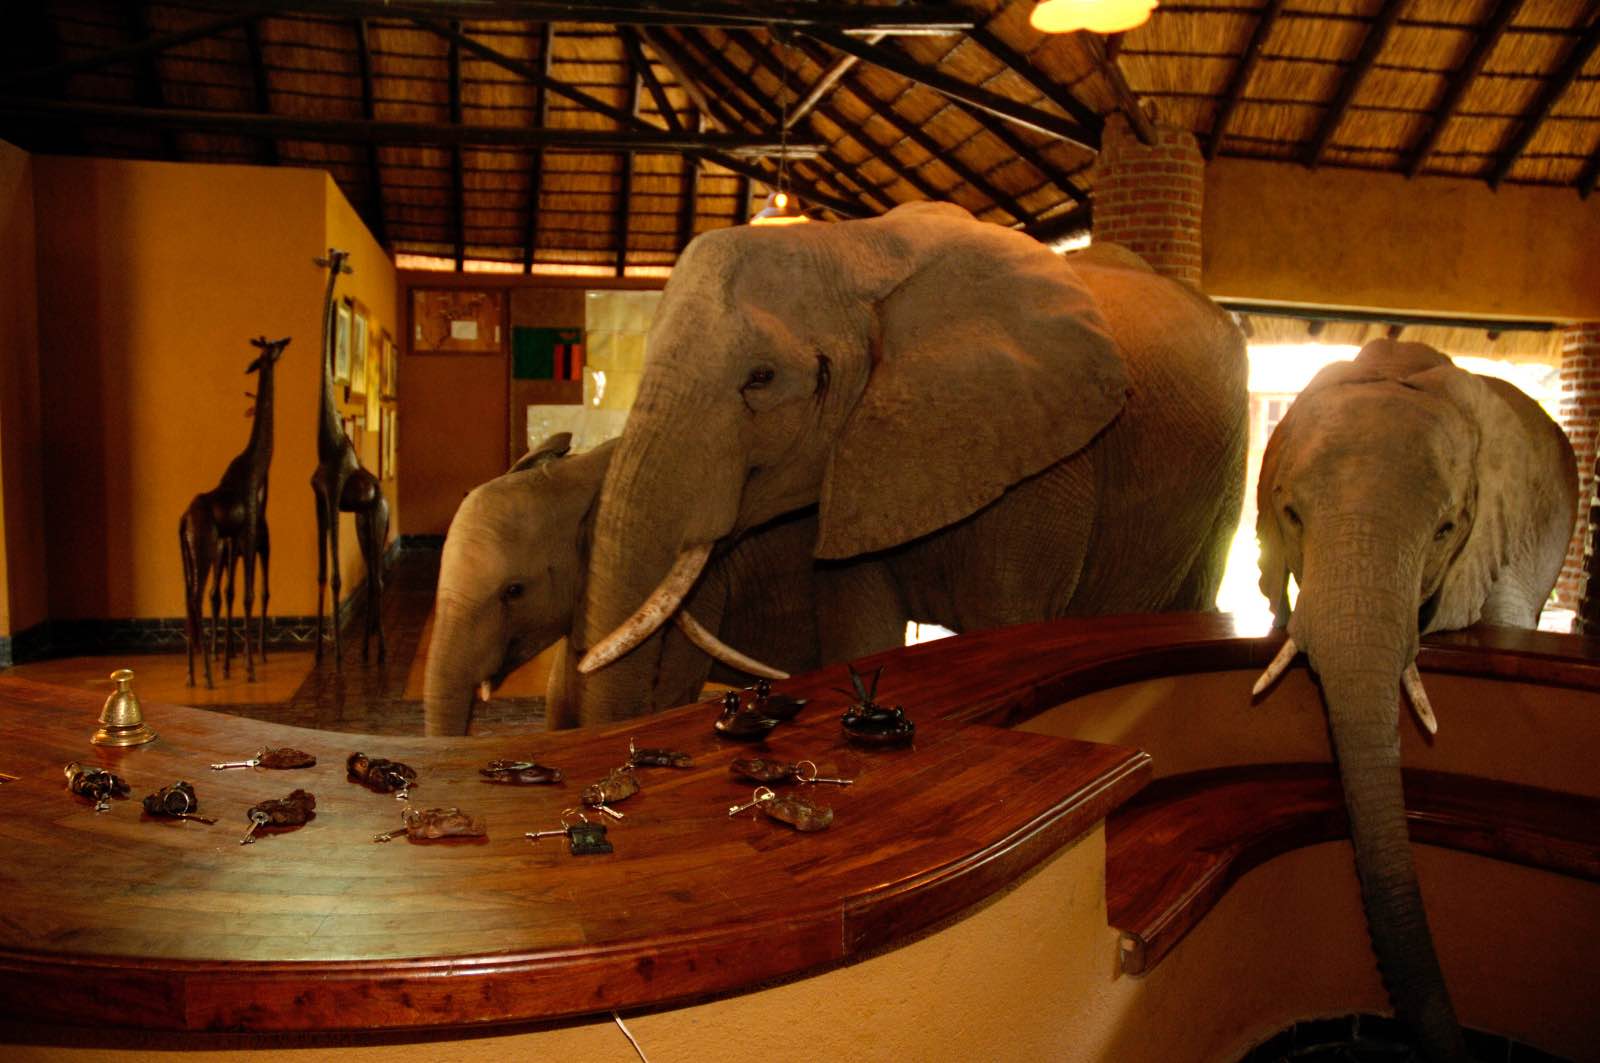 The herd of elephants moves through tje reception area of Mfuwe Lodge on their way to find the wild mango tree on the other side